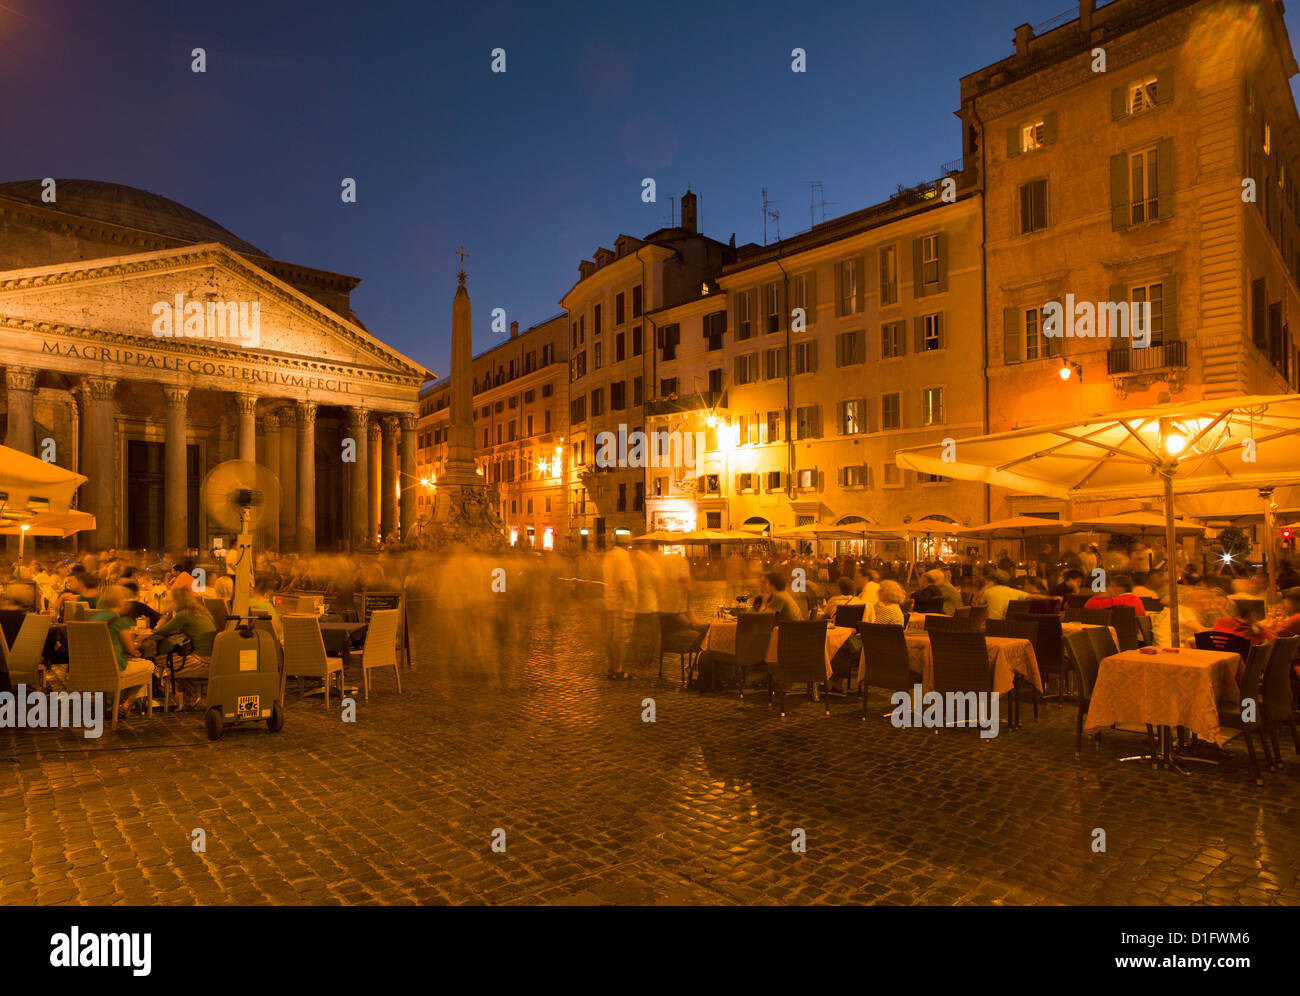 People dining at outside restaurant near The Pantheon, Rome, Lazio, Italy, Europe Stock Photo